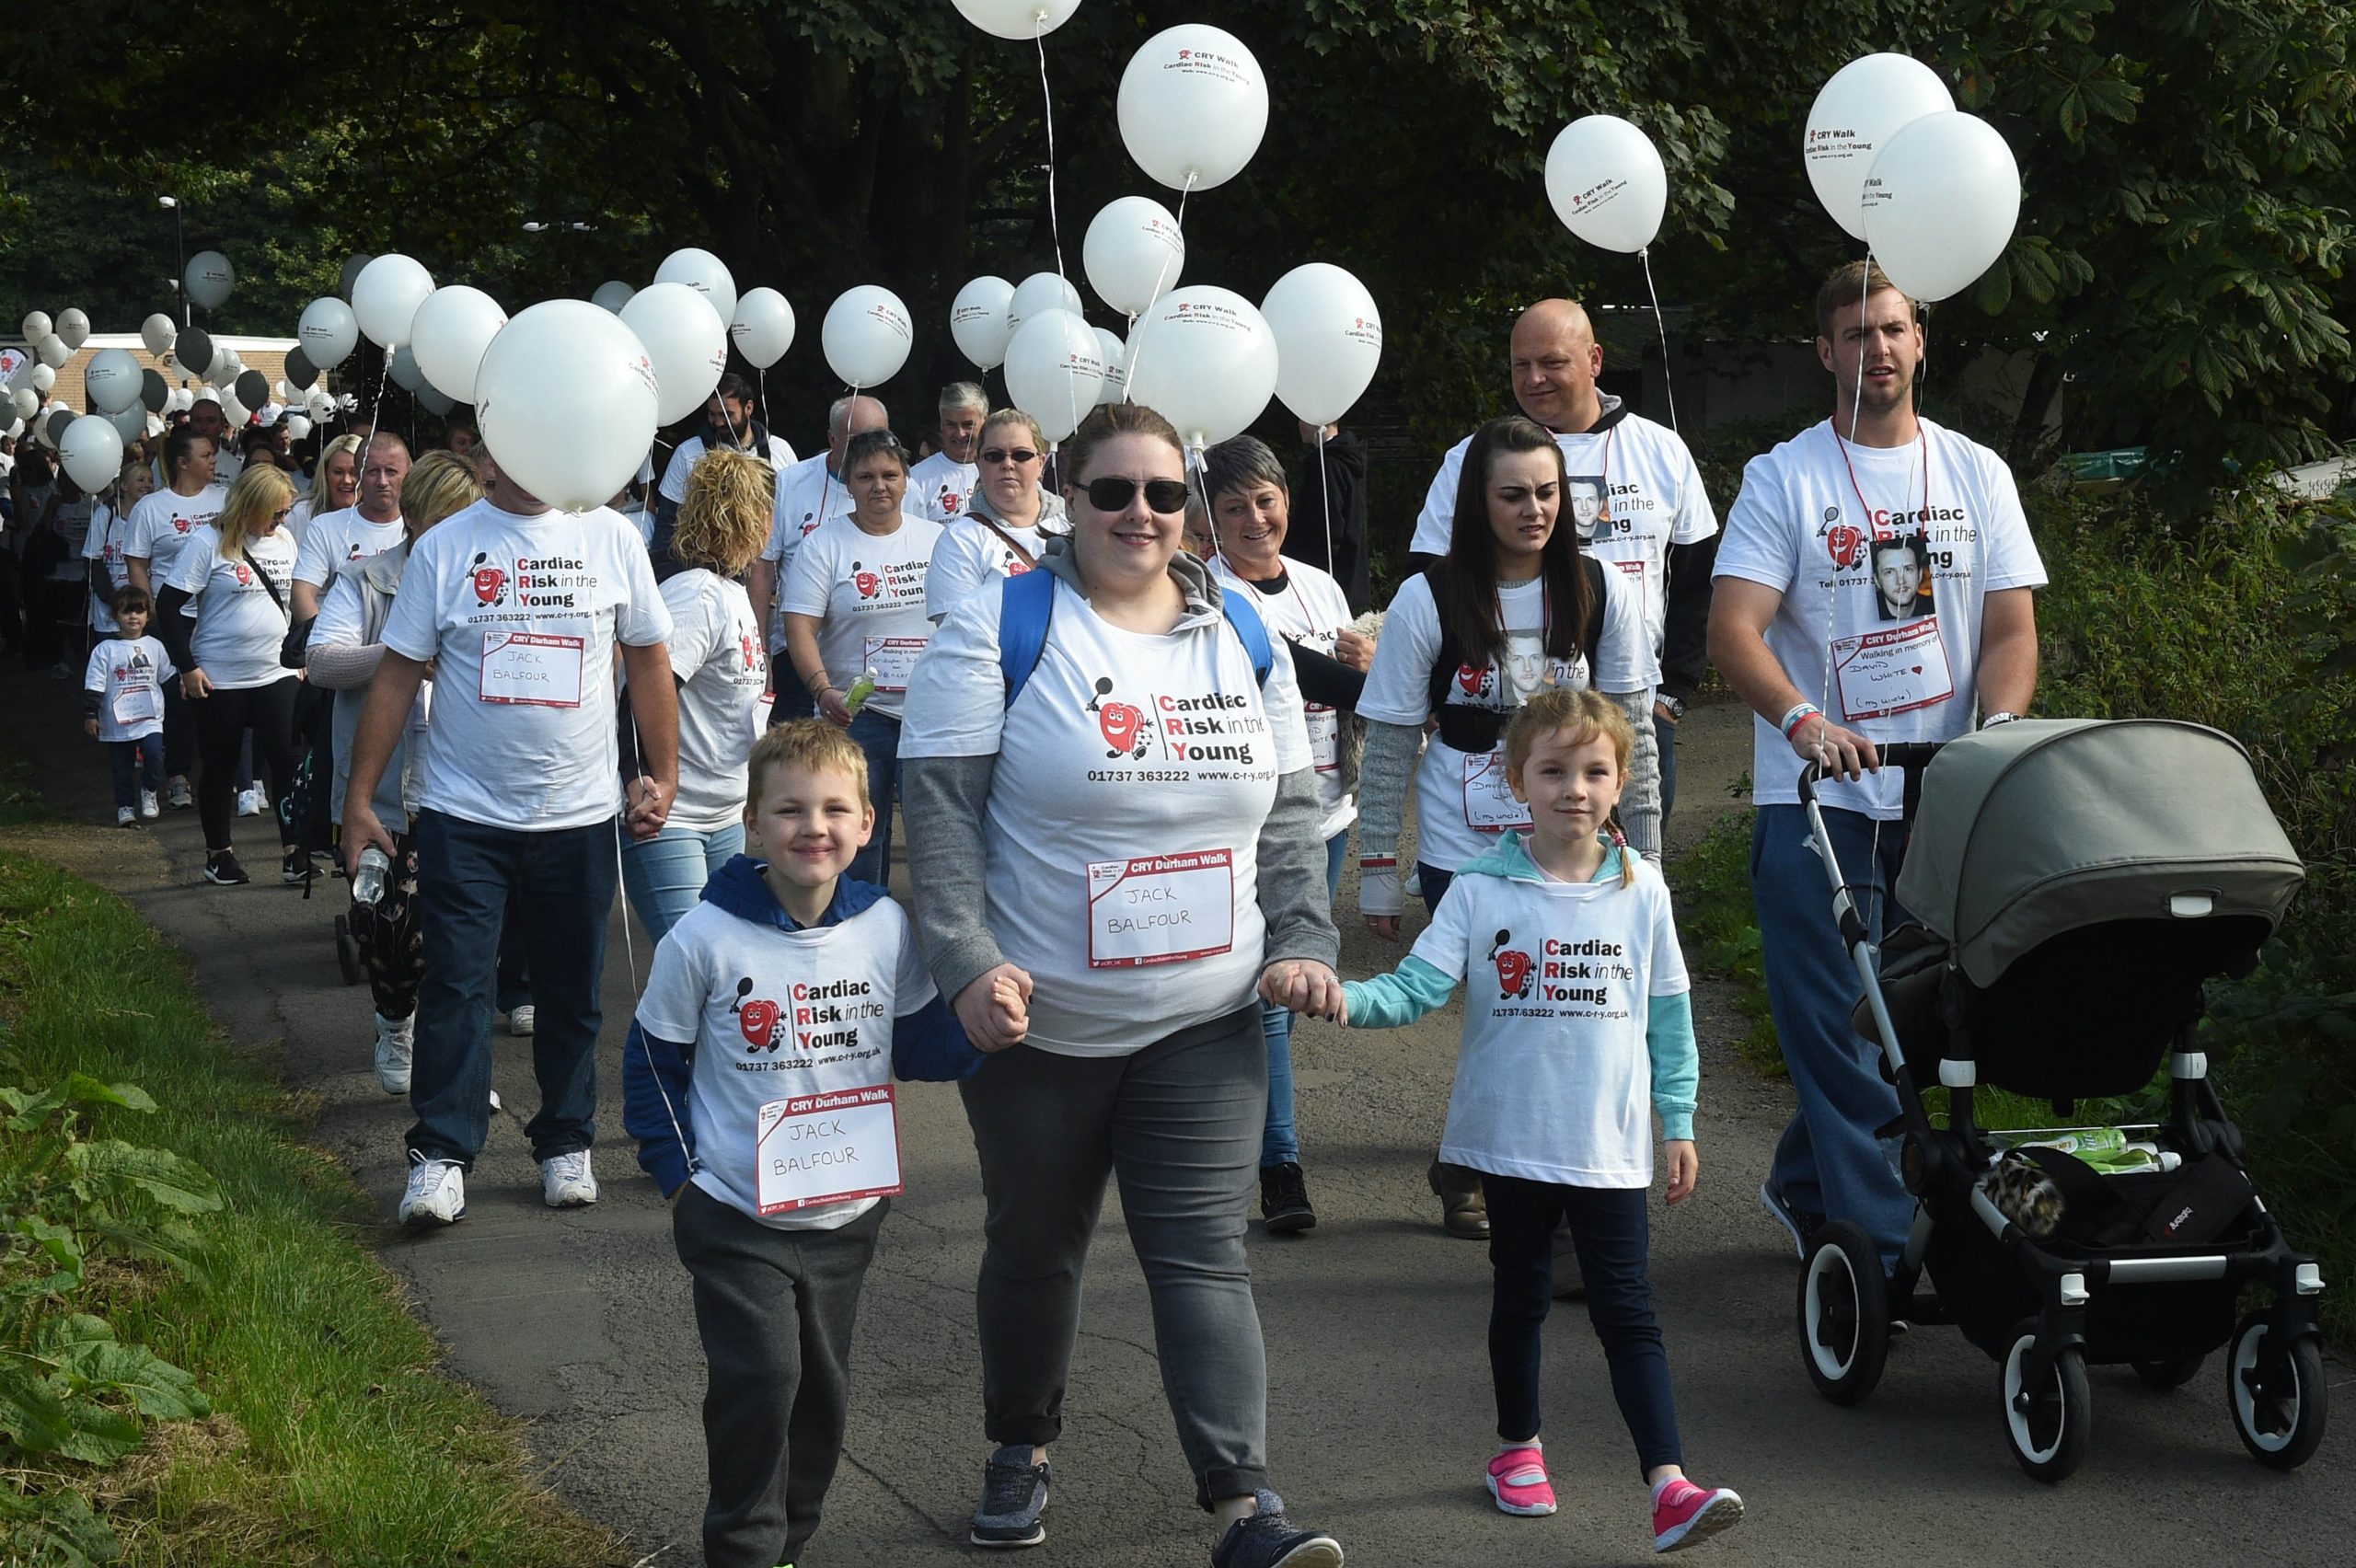 The Annual CRY (Cardiac Risk in the Young) charity walk took place on Saturday in Durham starting from the Rowing Club and going on a new route through the City. 01/10/16 Pic Doug Moody Photography